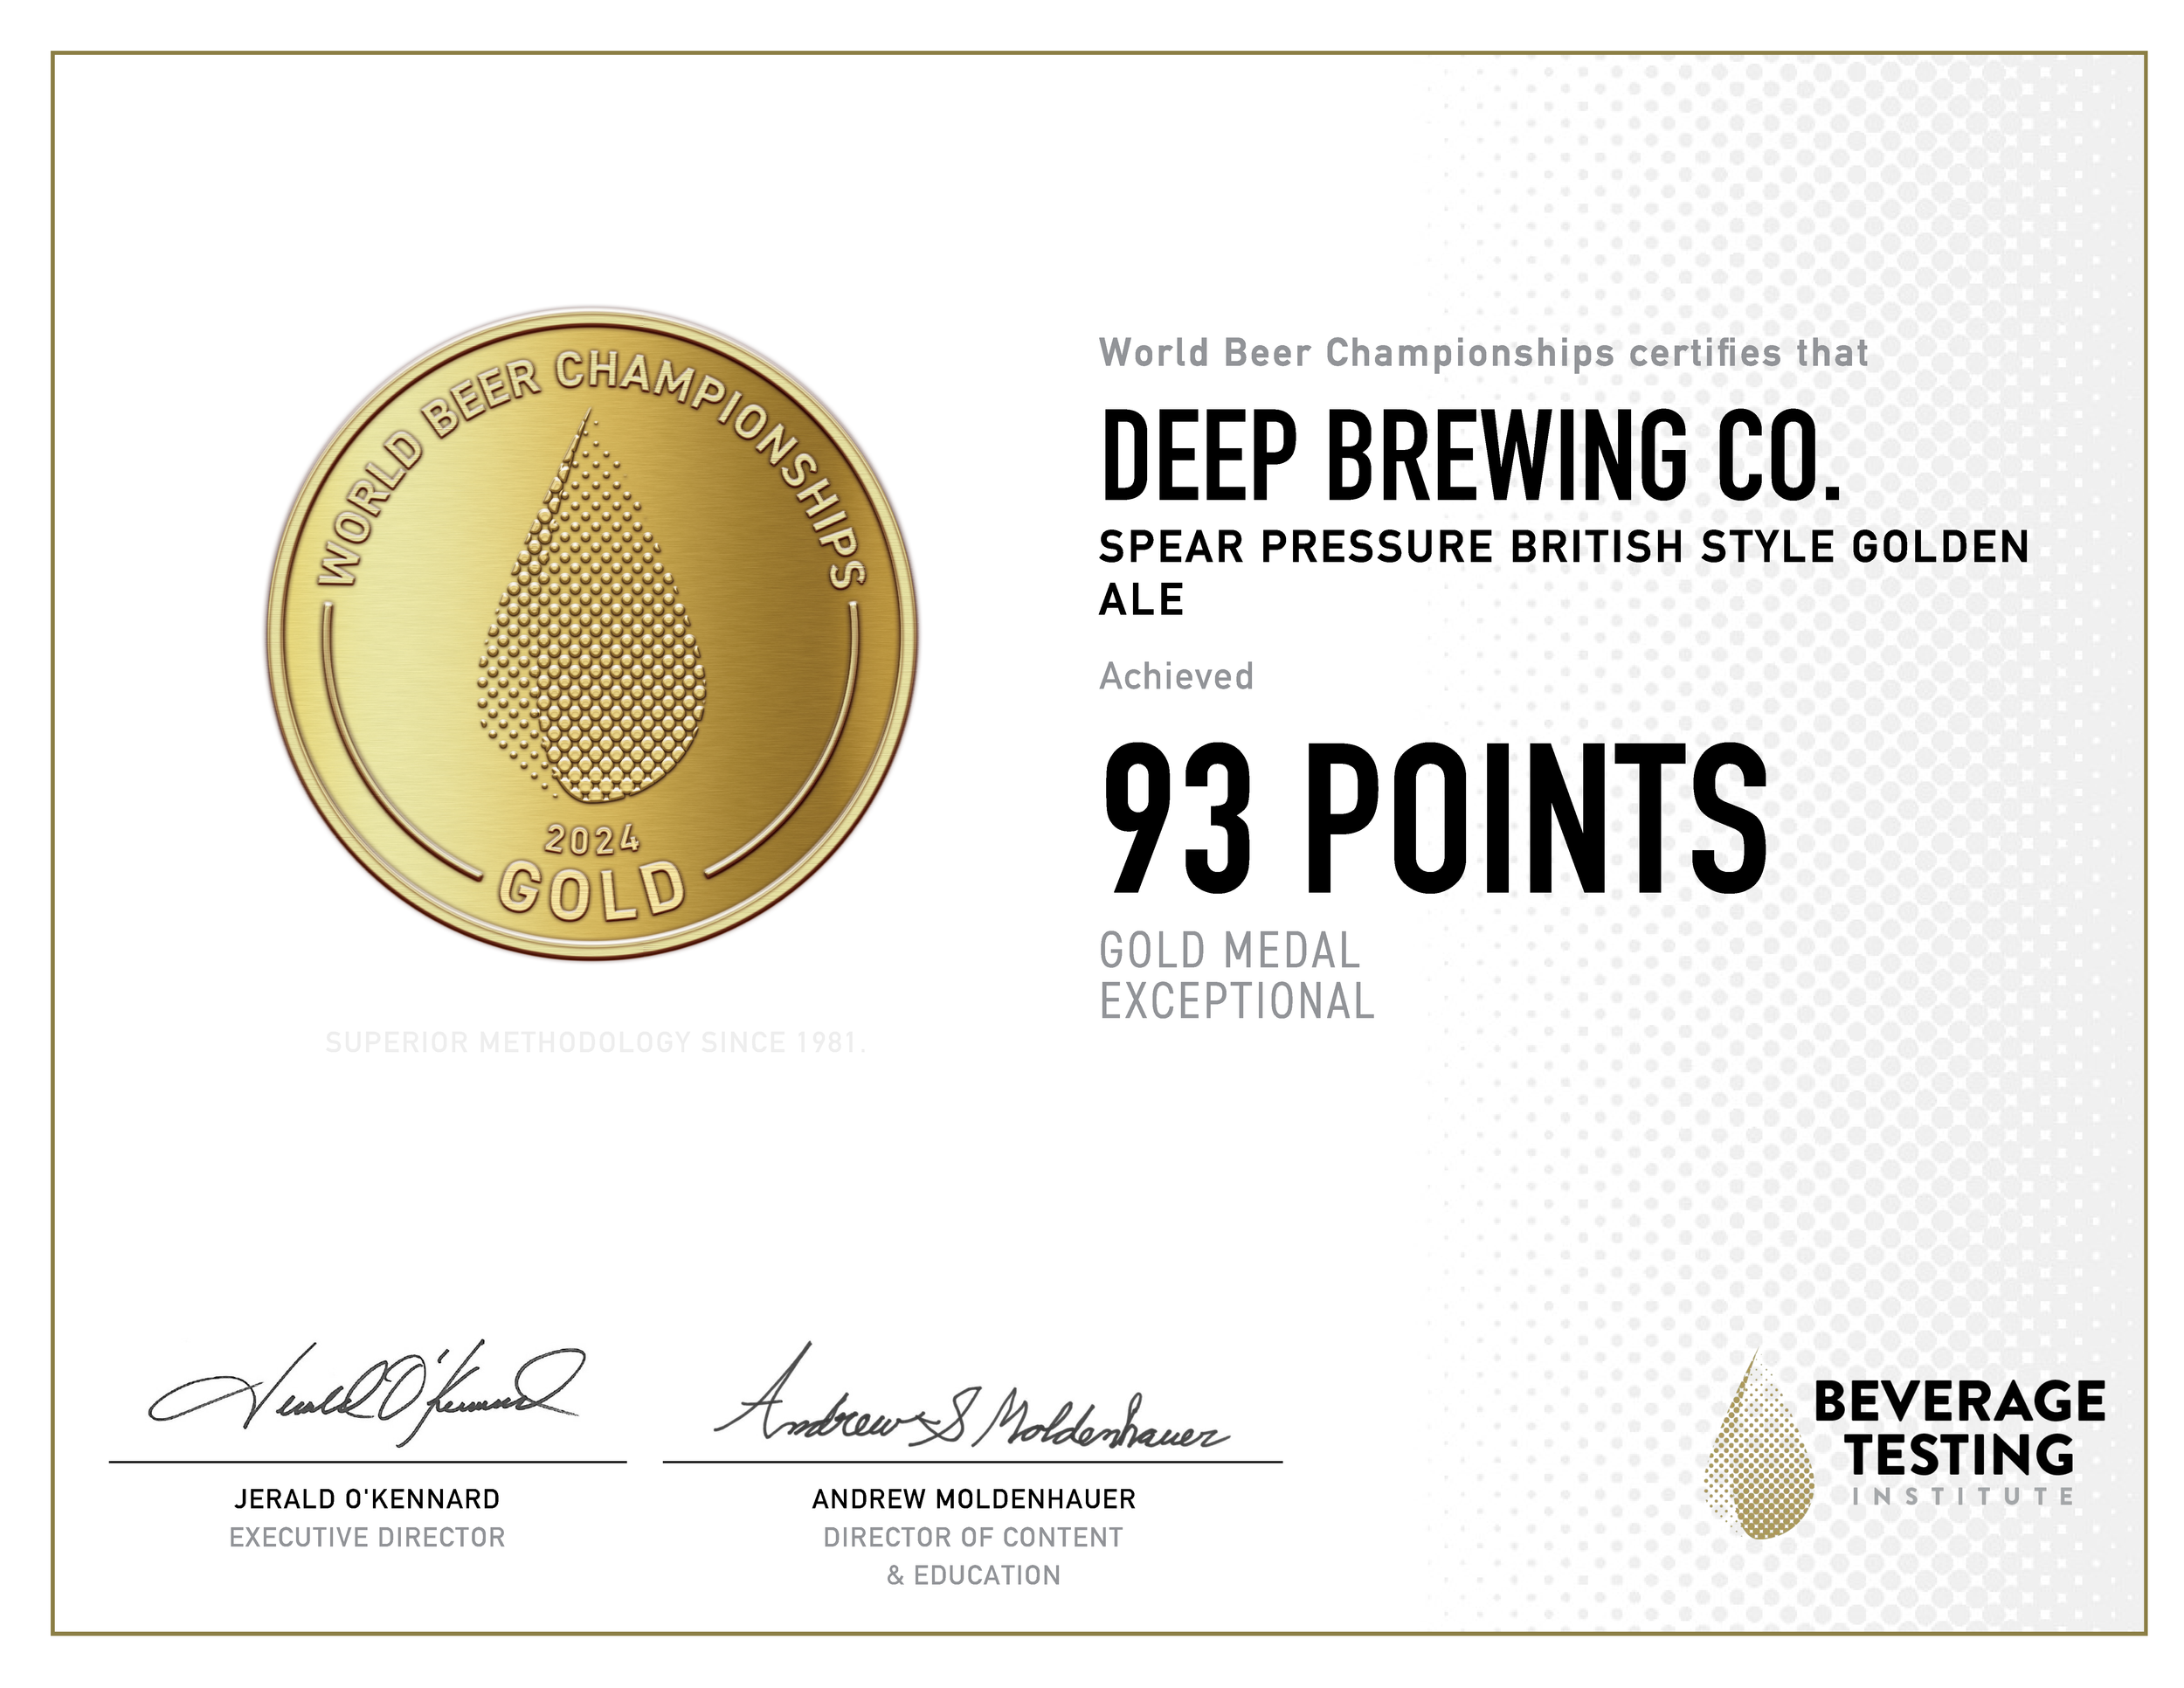 BTI-Certificate-Deep-Brewing-Co-Spear-Pressure-British-Style-Golden-Ale-USA-12-16-2023-21423.png